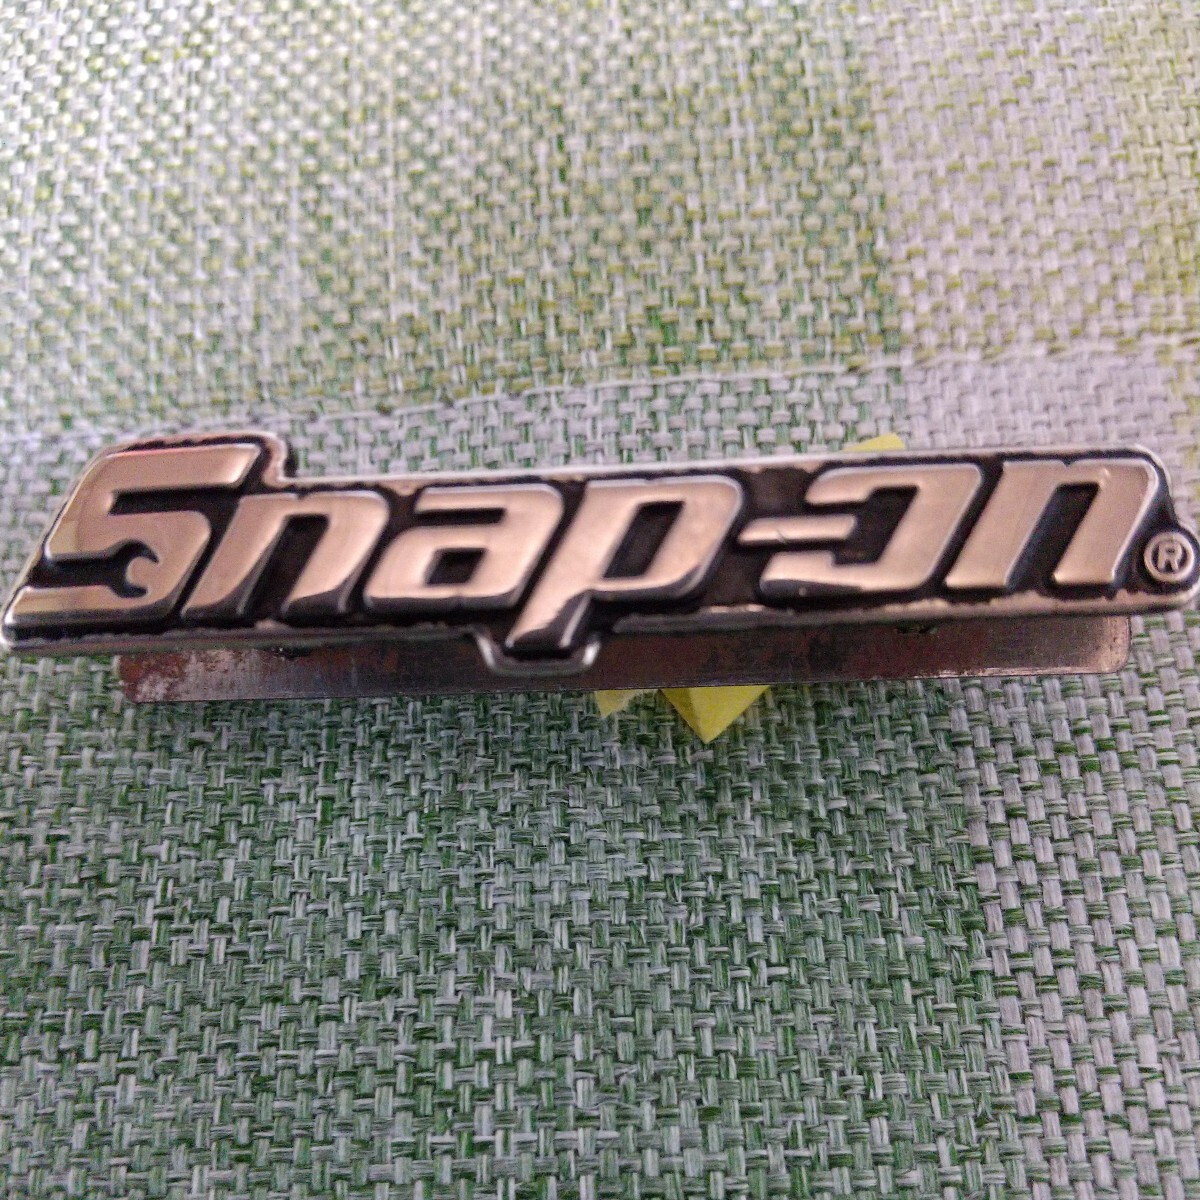  period thing Snap-on Snapon emblem 